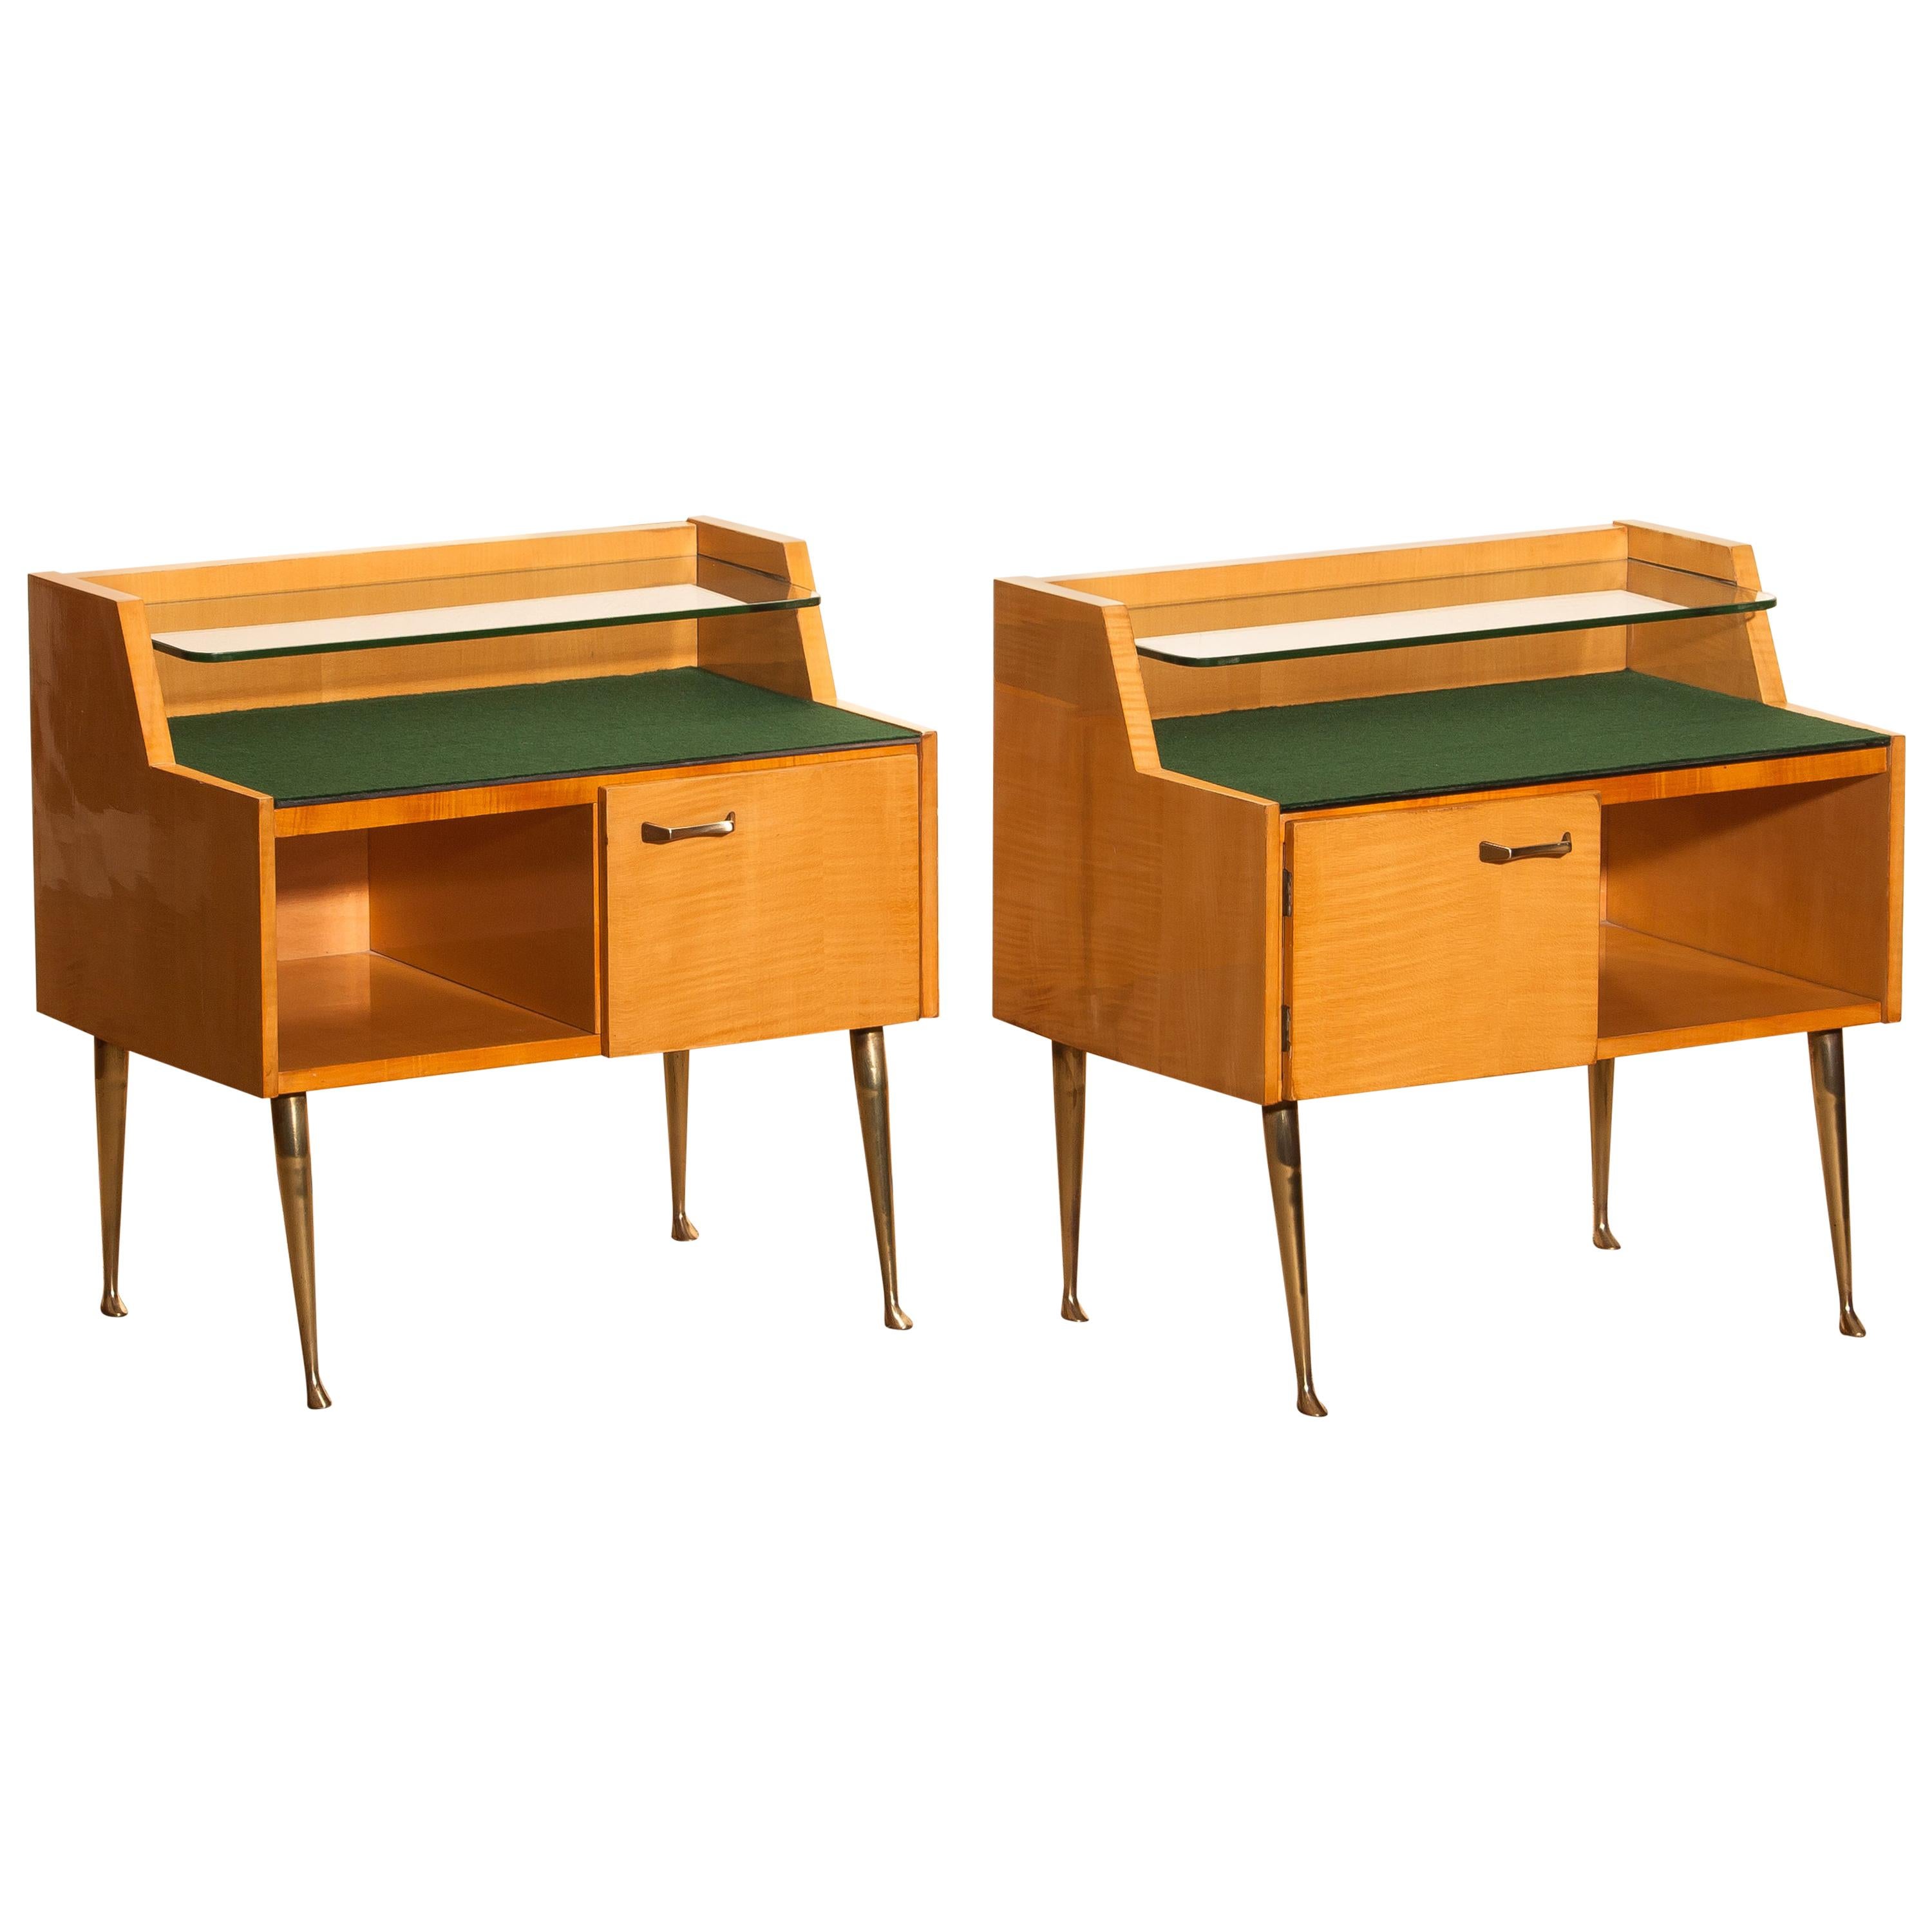 1950s, Pair of Italian Nightstands in Maple with Brass Legs by Paolo Buffa